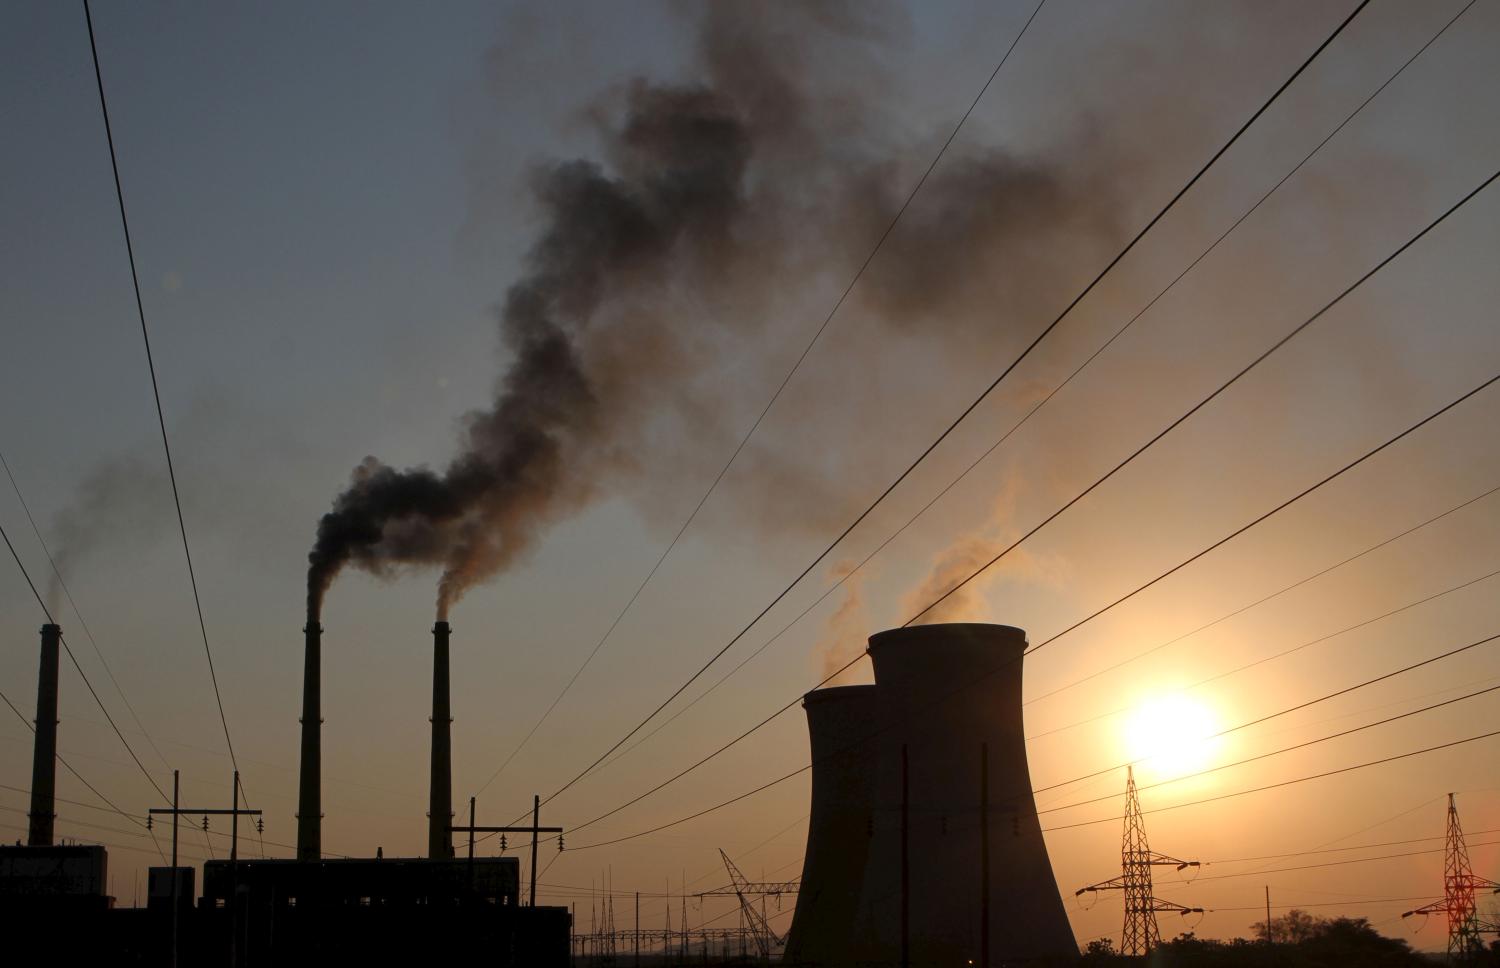 Cooling towers are seen at a coal fired power station in Hwange, Zimbabwe September 28, 2015. The plant, one of the country's biggest electricity generating units, is back online after annual routine maintenance at the start of this month led to severe power cuts in the southern African nation. Picture taken September 28, 2015.   REUTERS/Philimon Bulawayo  - GF10000226045